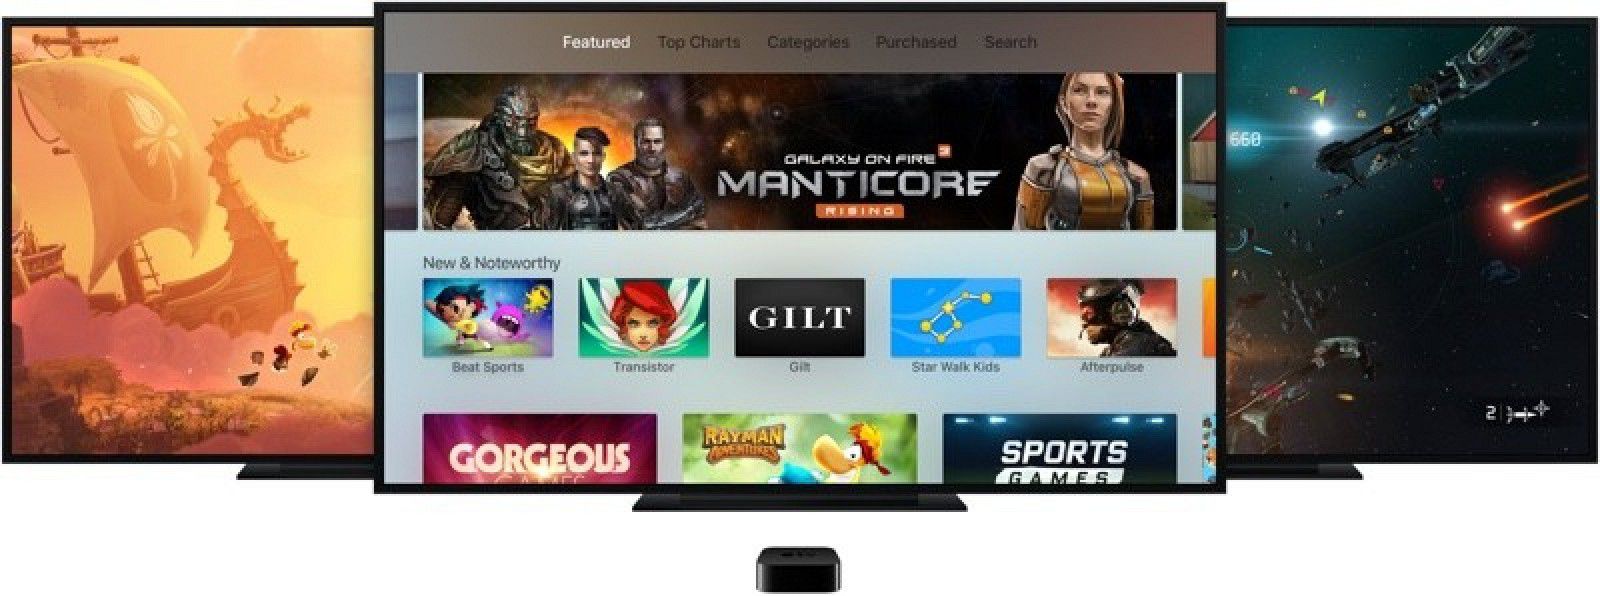 Apple Execs Discusses That They Should Not ‘Leave Money on the Table’ When Deciding on Apple TV Subscription Fees